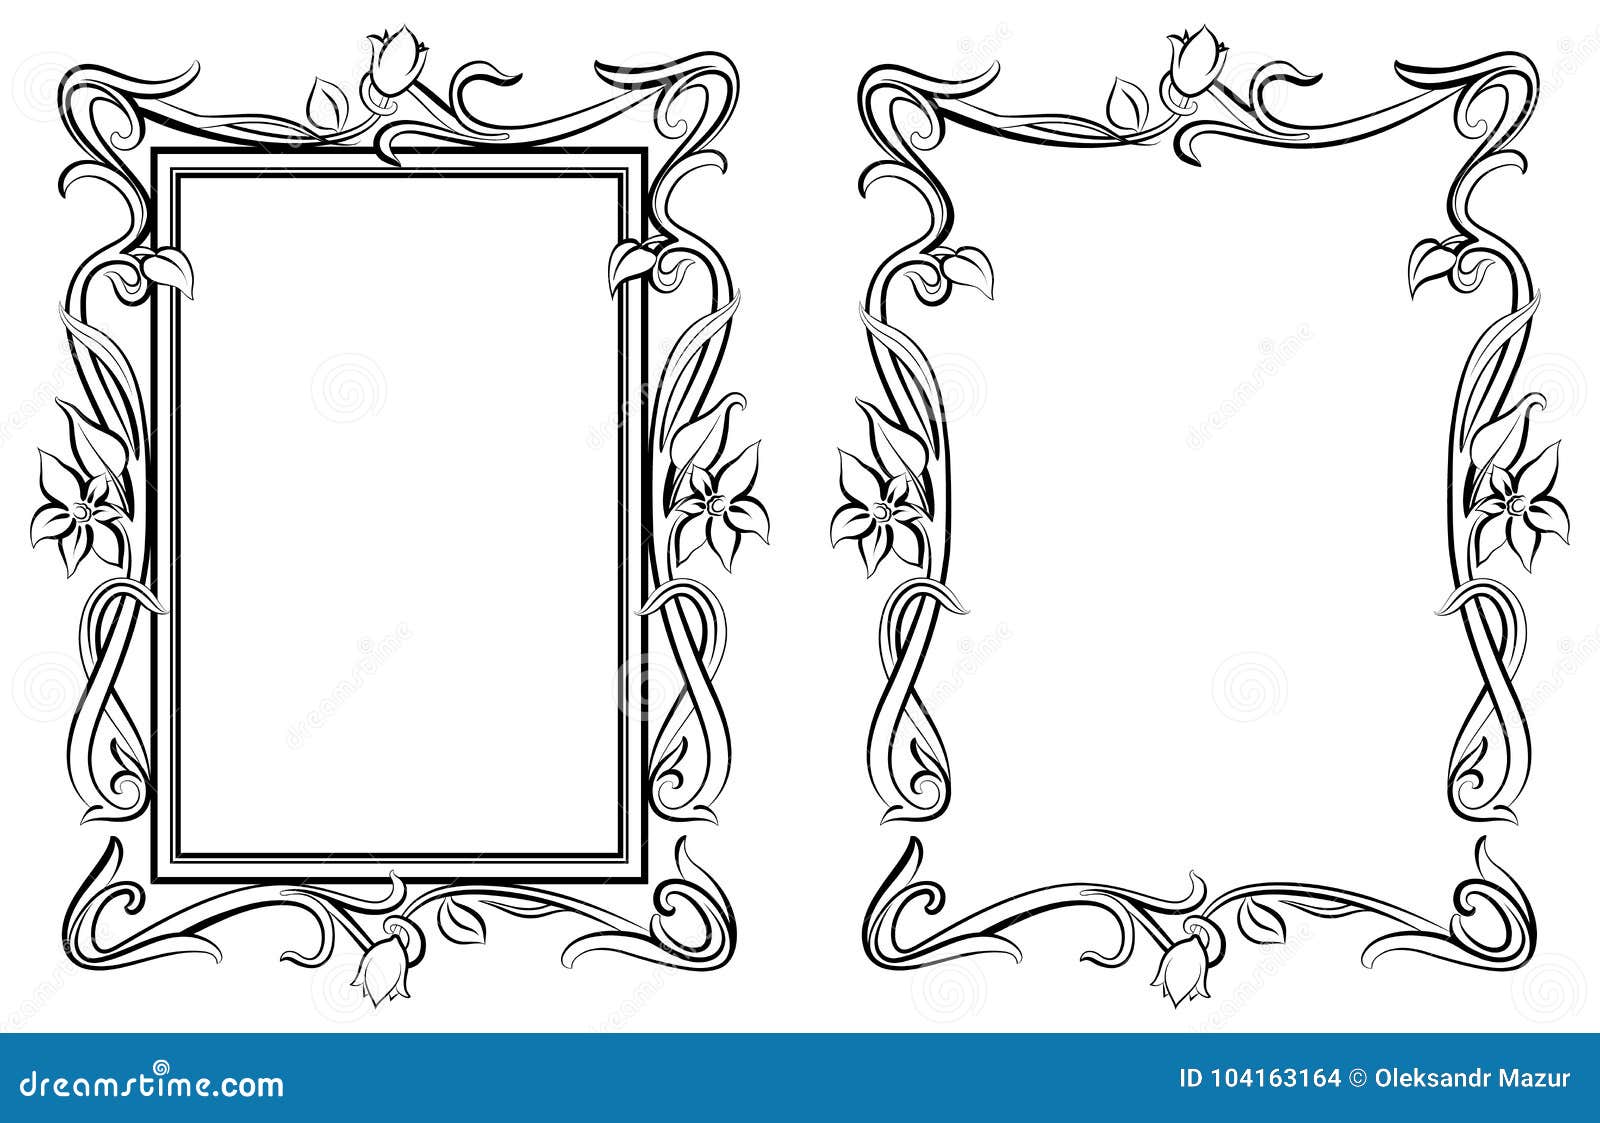 Download Decorative Floral Modern Style Frames Stock Vector ...